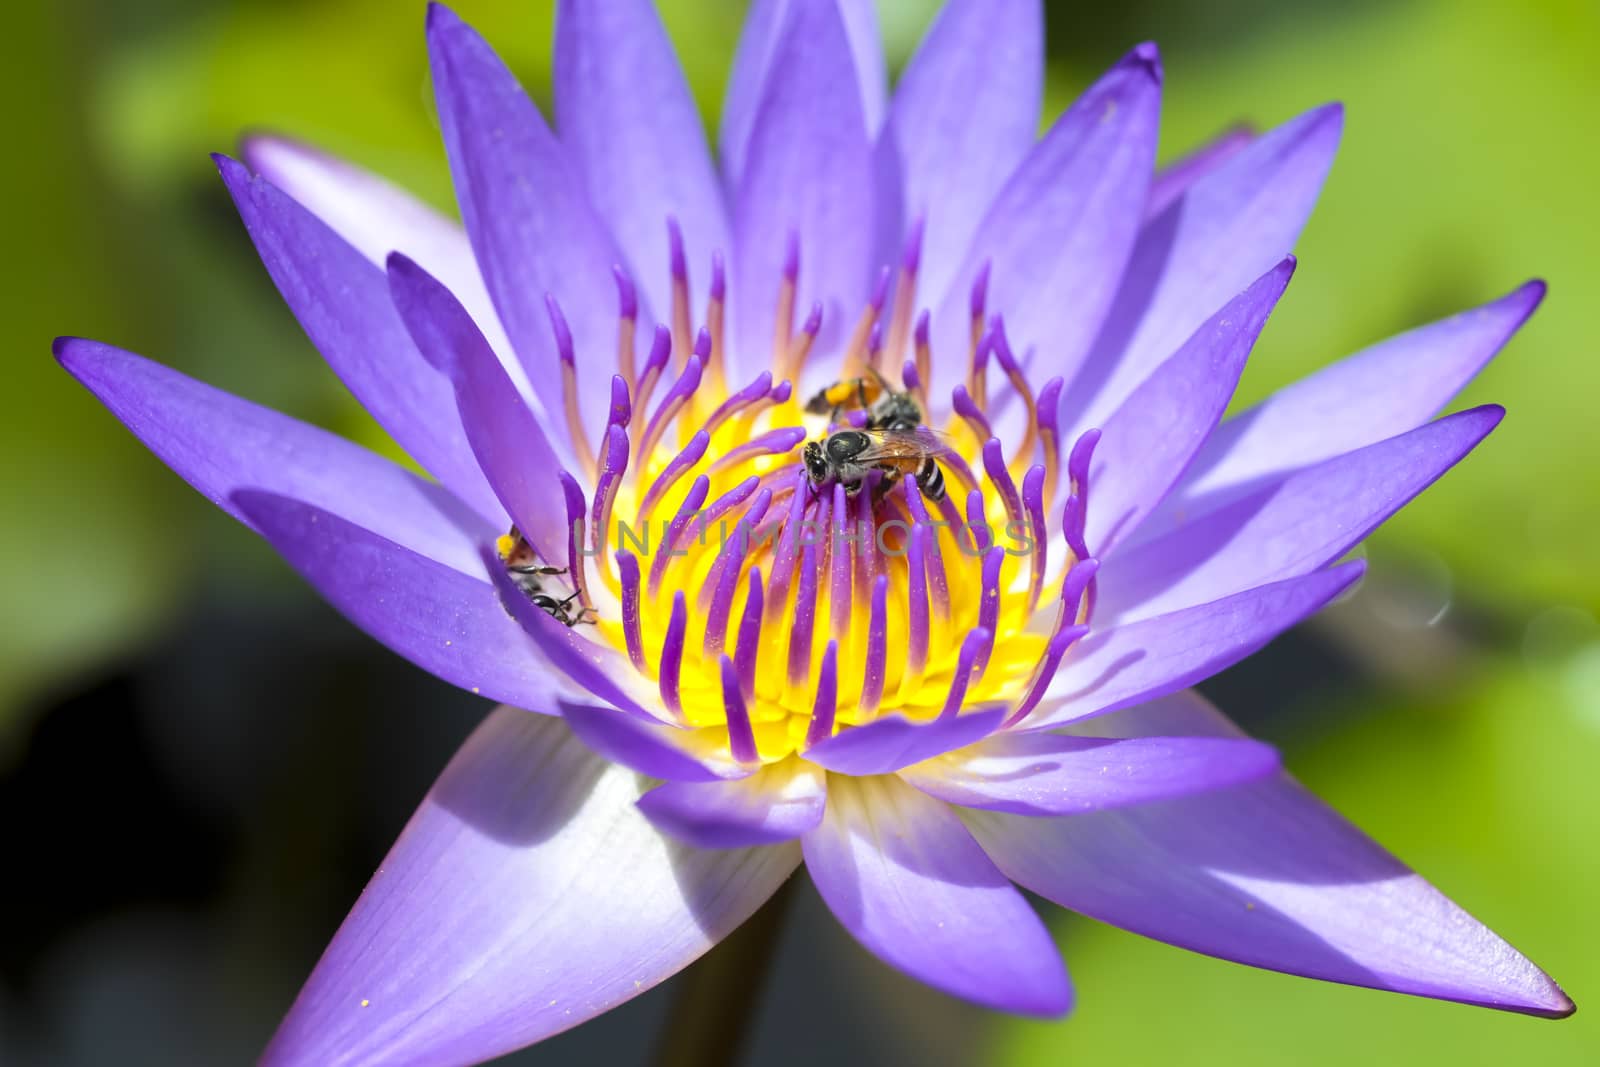 Lotus with bee are agriculture and nectar.